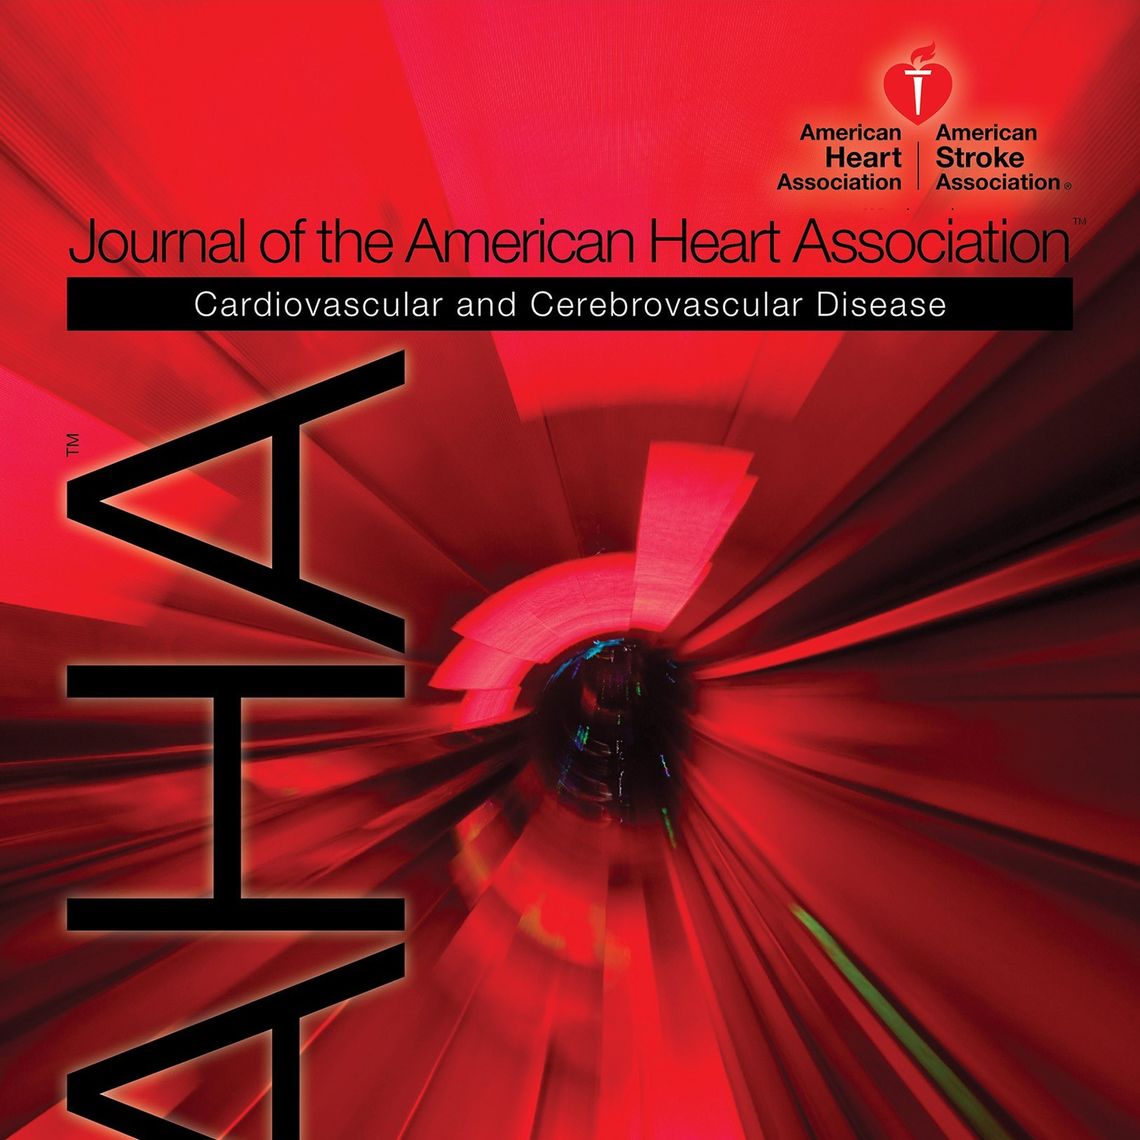 Self-Care for the Prevention and Management of Cardiovascular Disease and Stroke: A Scientific Statement for Healthcare Professionals From the American Heart Association.